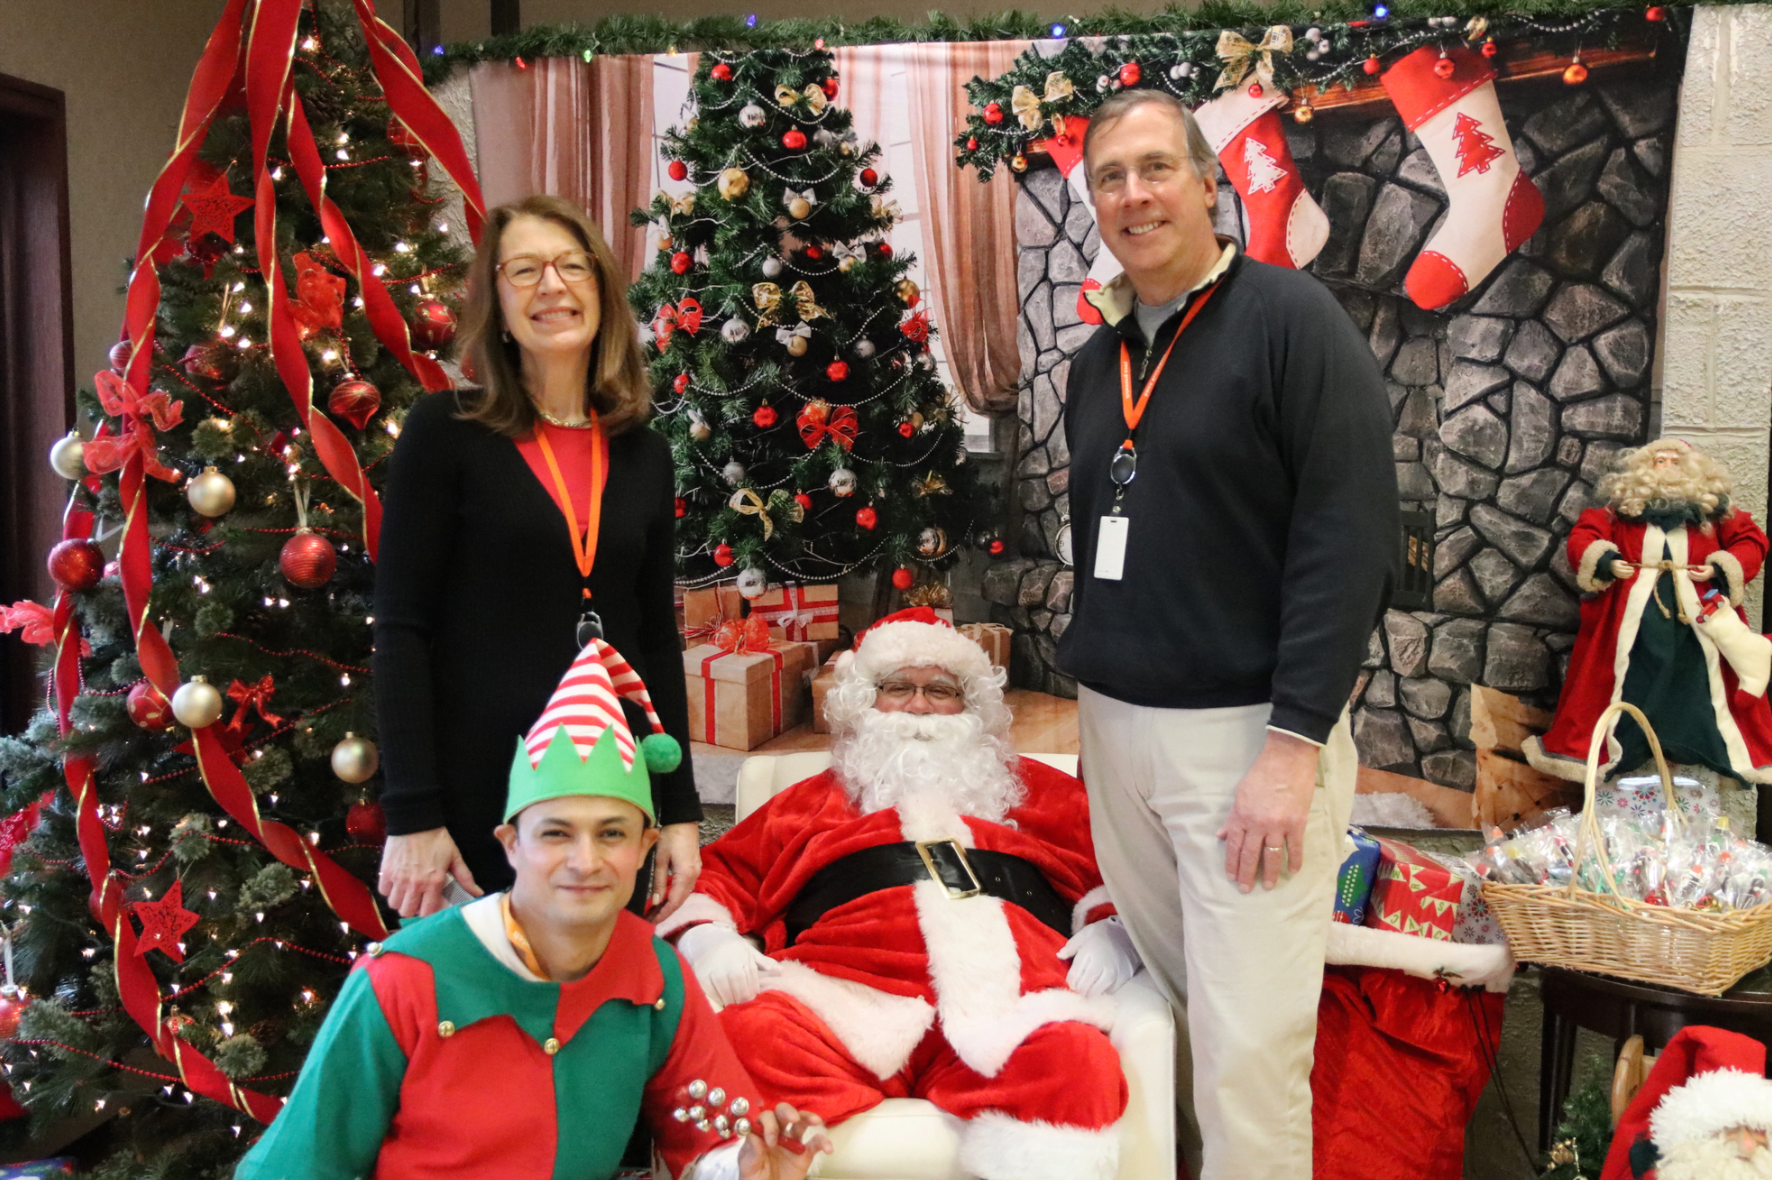 YWCA Greenwich CEO Mary Lee Kiernan and CFO John Stack at the family holiday event. Dec 7, 2019 Photo: Leslie Yager